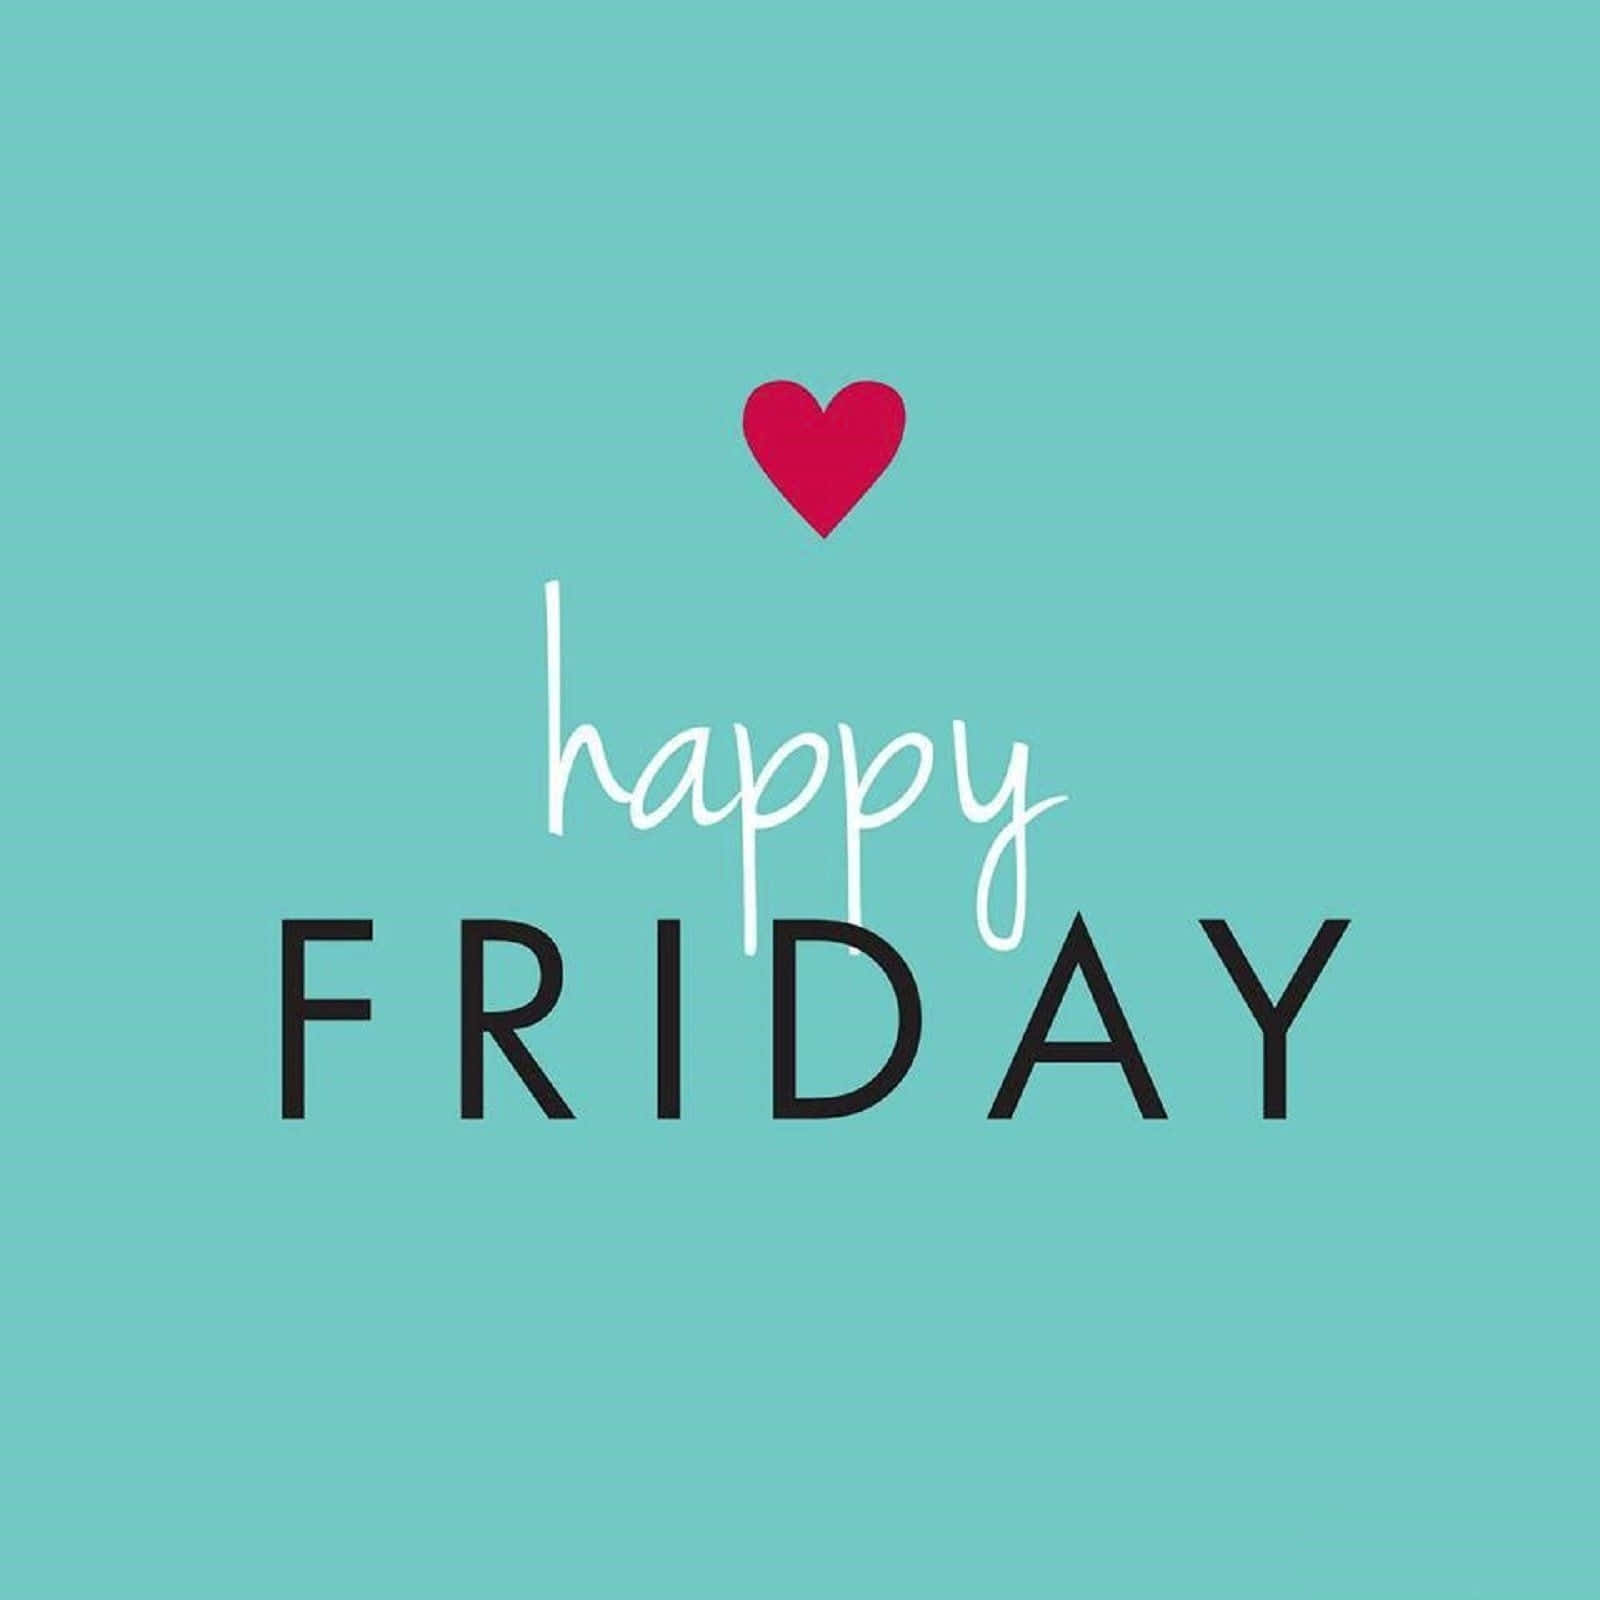 "Make the most of the weekend and have a Happy Friday!"